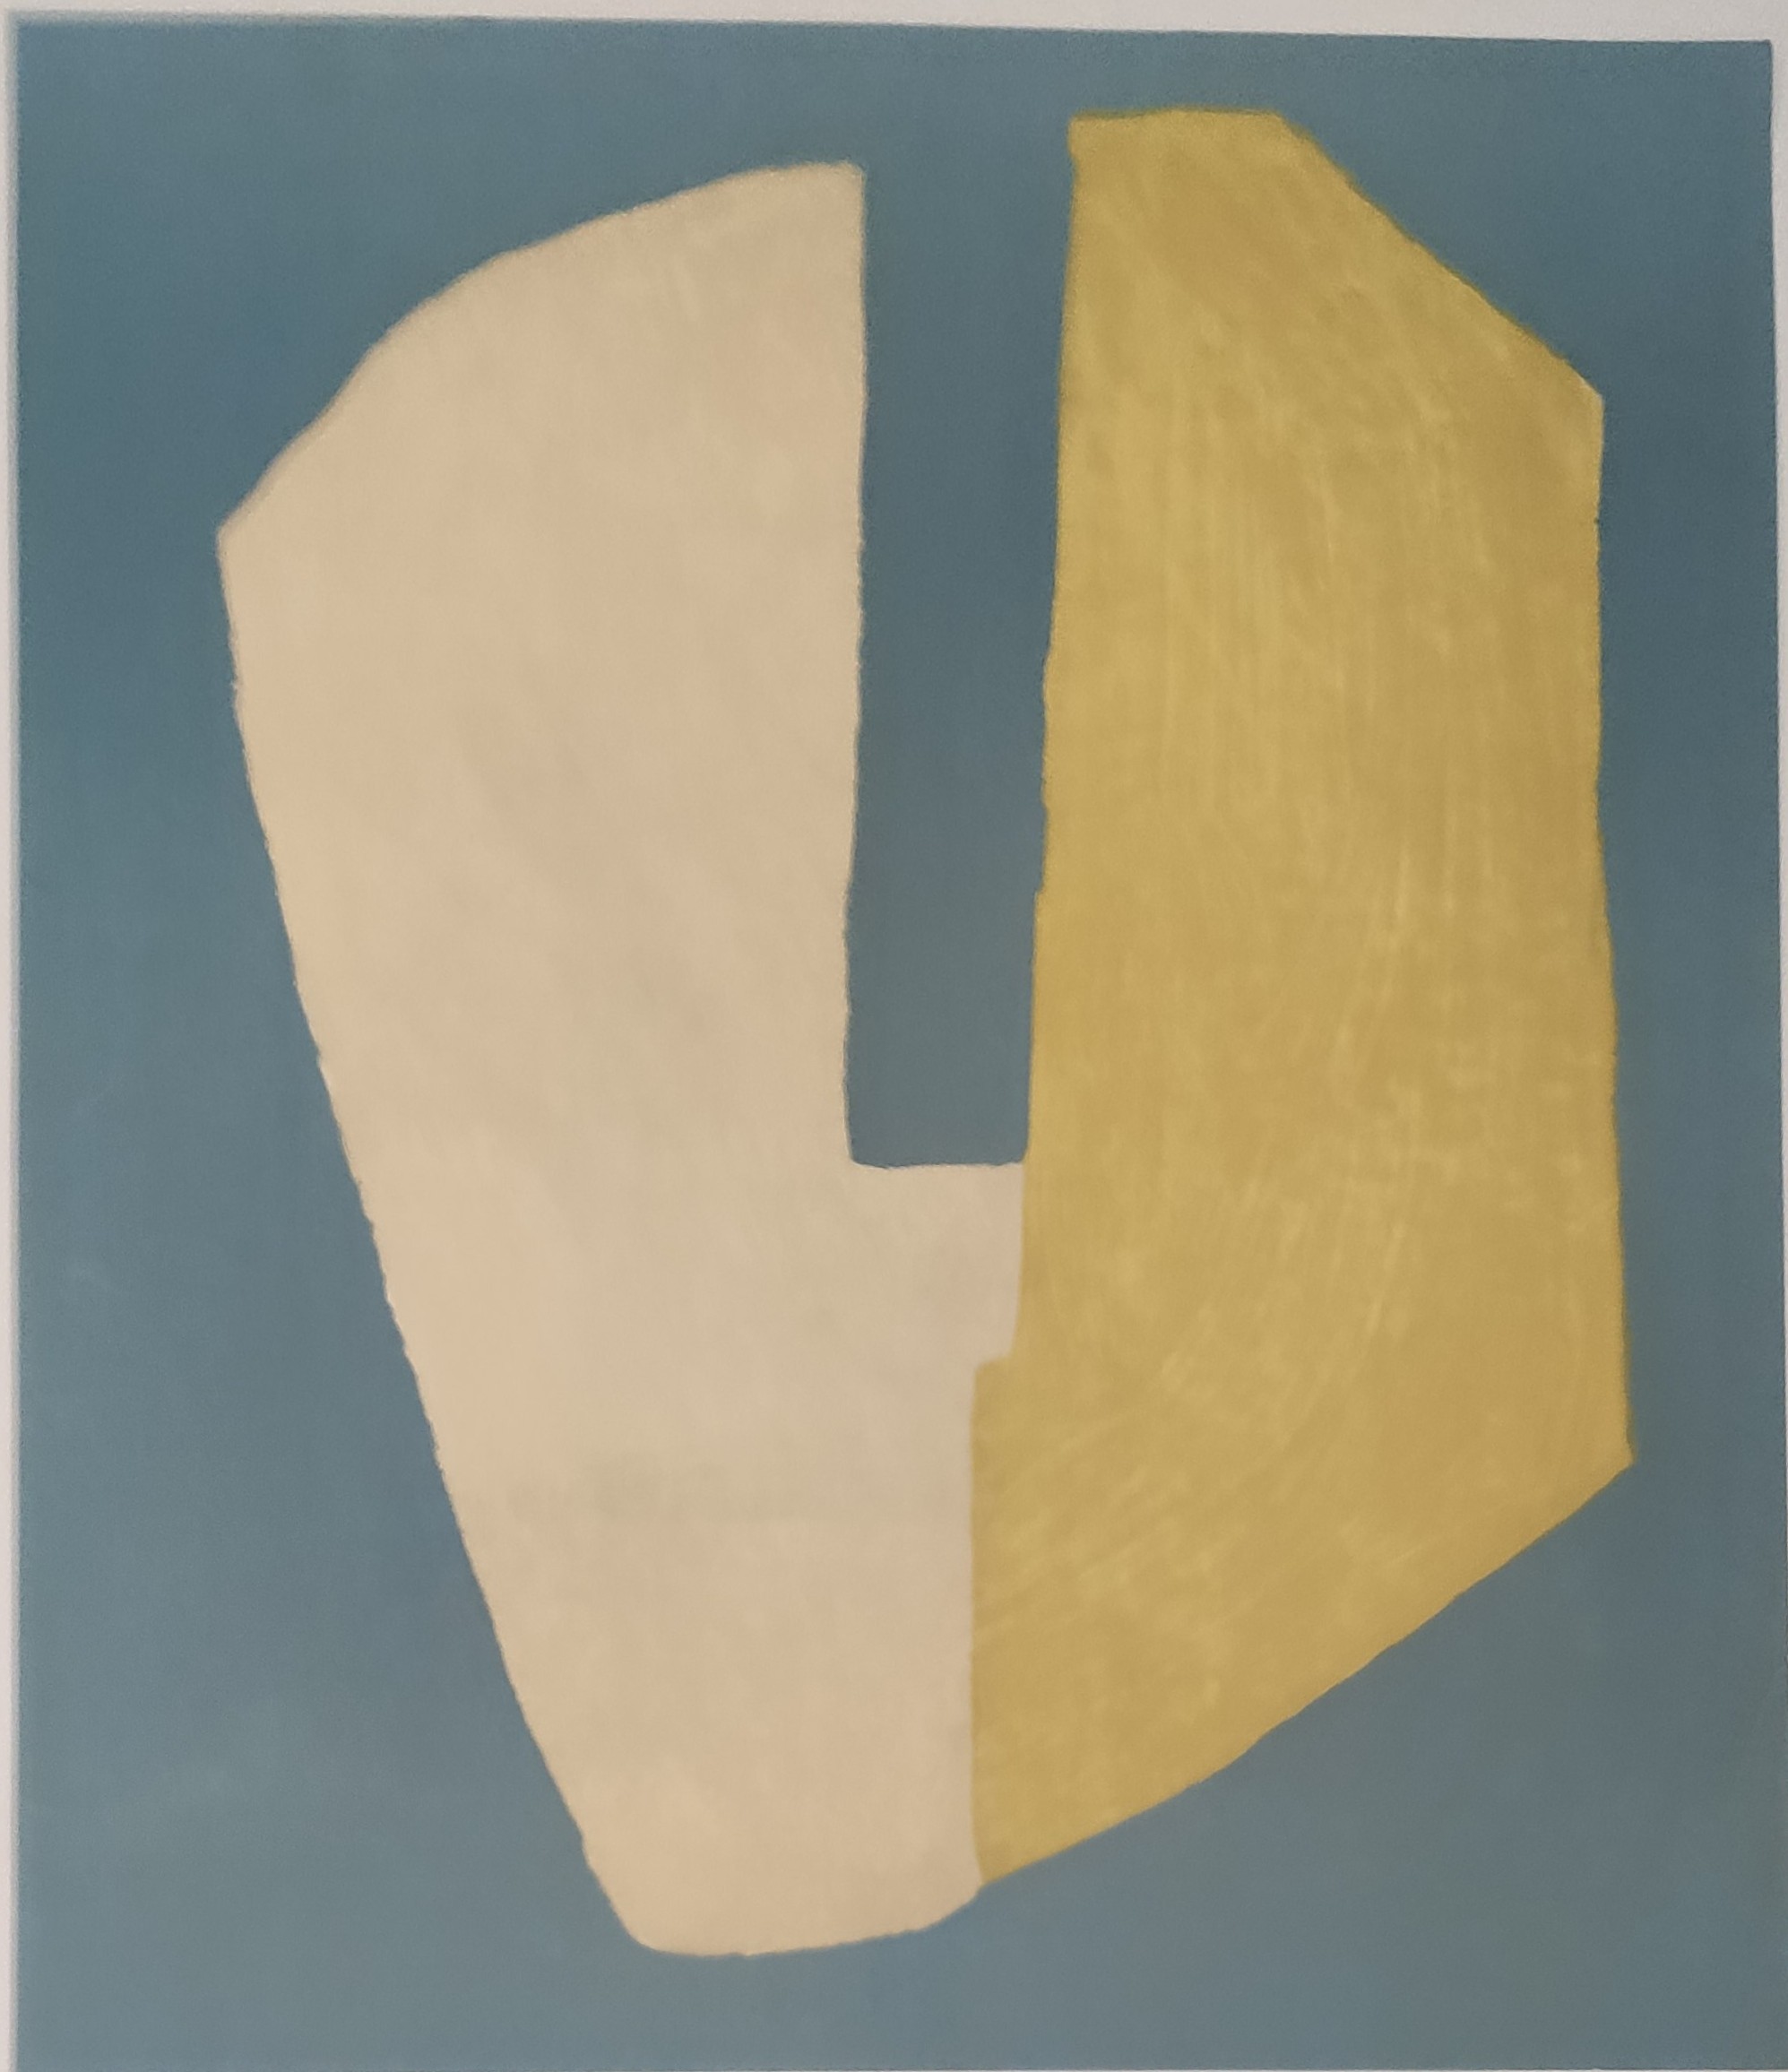 COMPOSITION TRICOLORE - POLIAKOFF Serge (1900 - 1969) - Lithographie